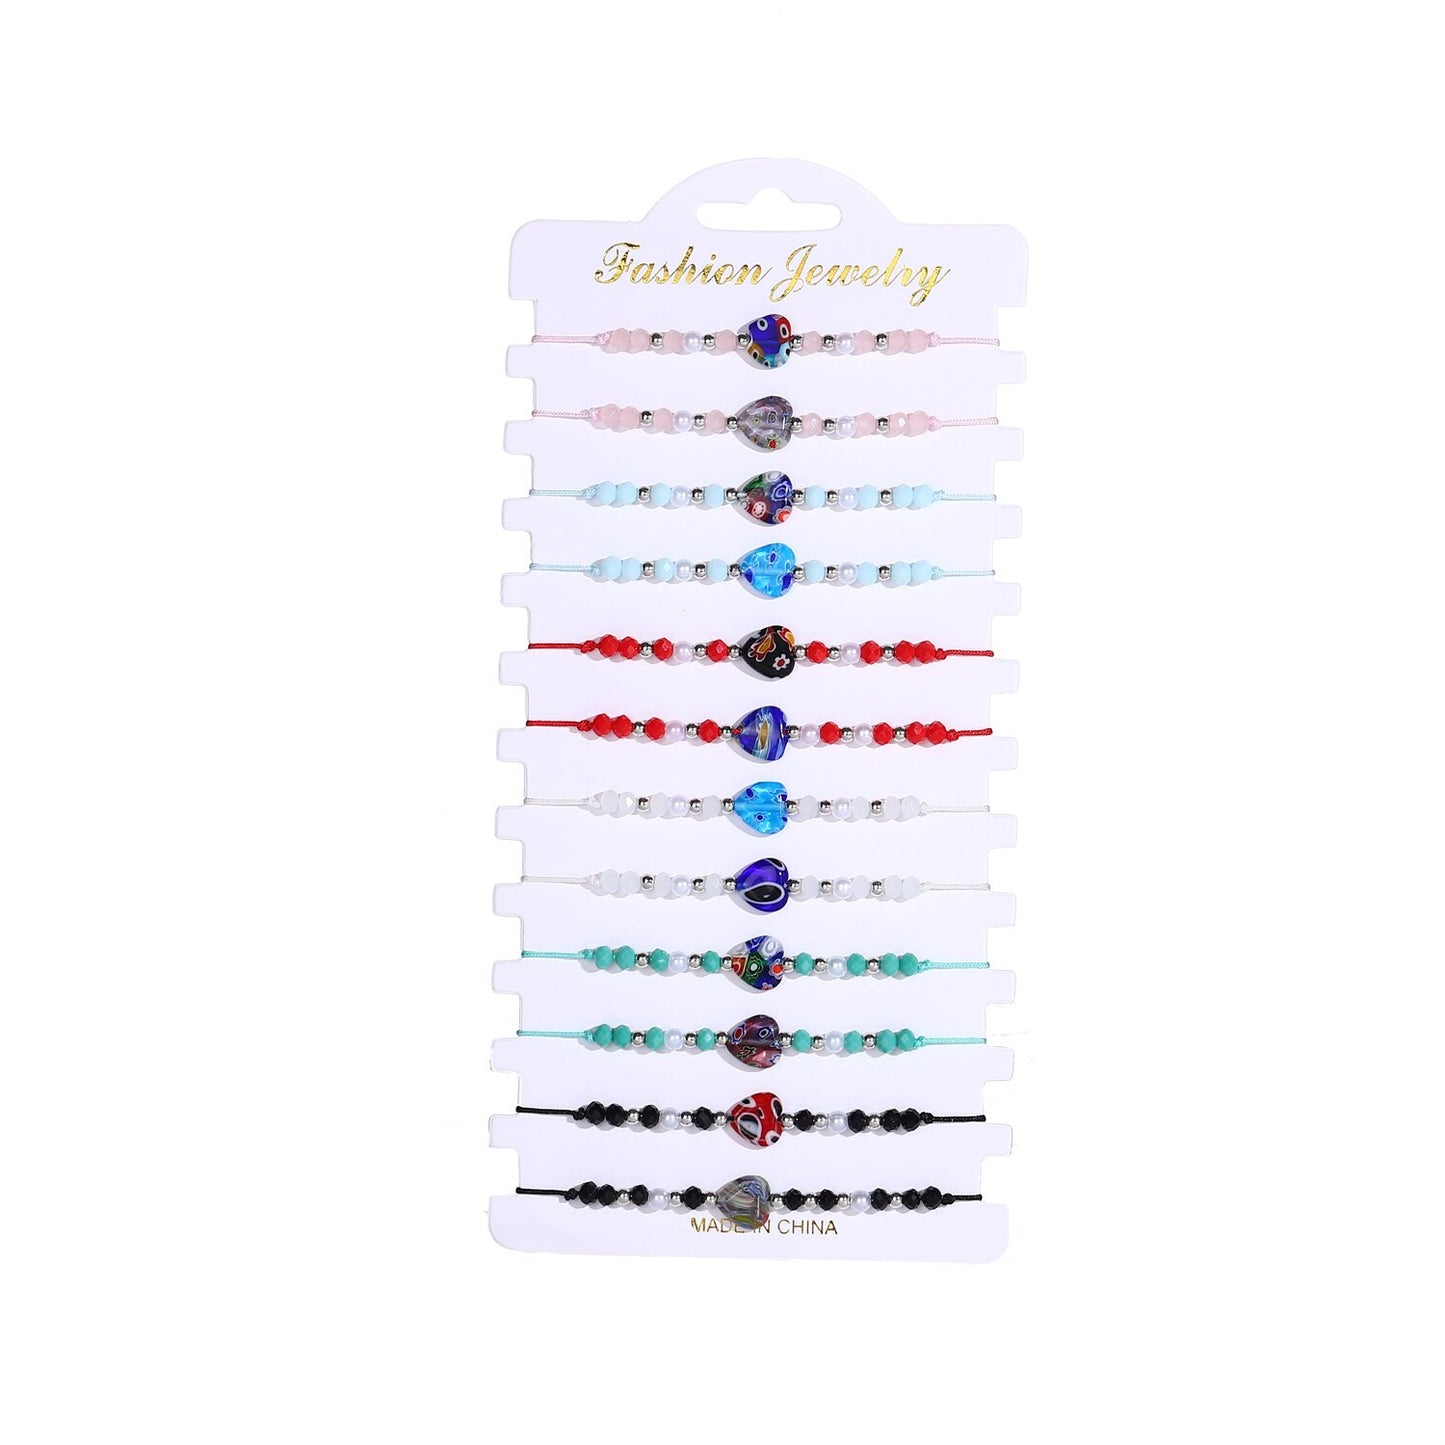 12 Pieces Crystal Seed Beads Heart Pendant Bracelet for Women Men Adjustable Summer Surf Anklet Jewelry Mixed Colors Wholesale